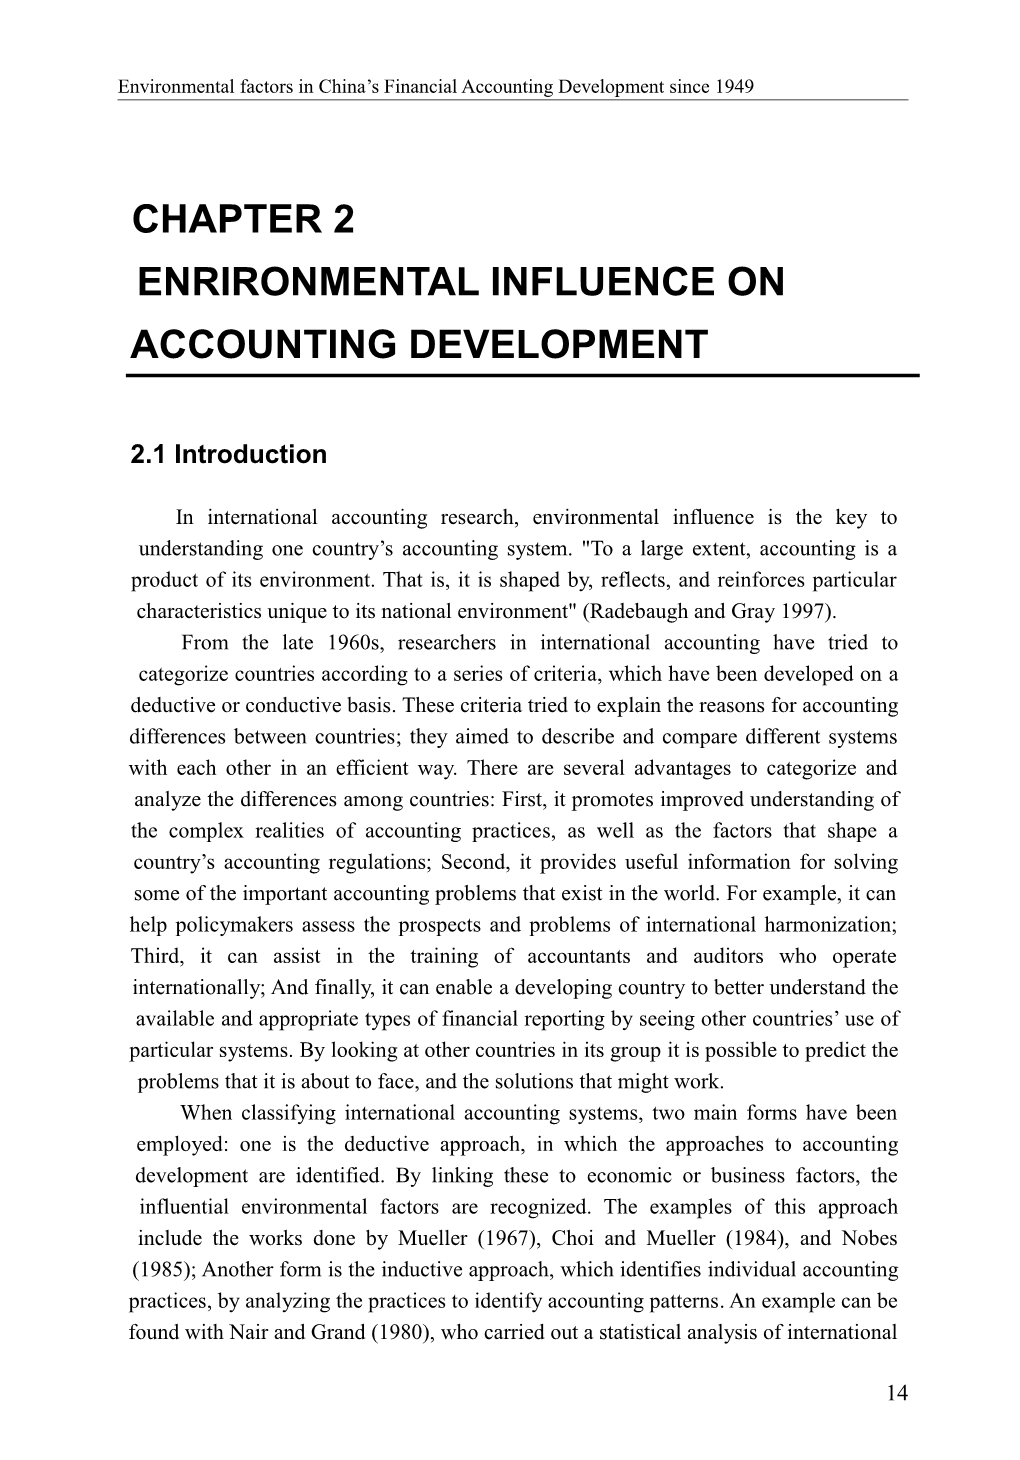 Chapter 2 Environmental Influence on Accounting Development